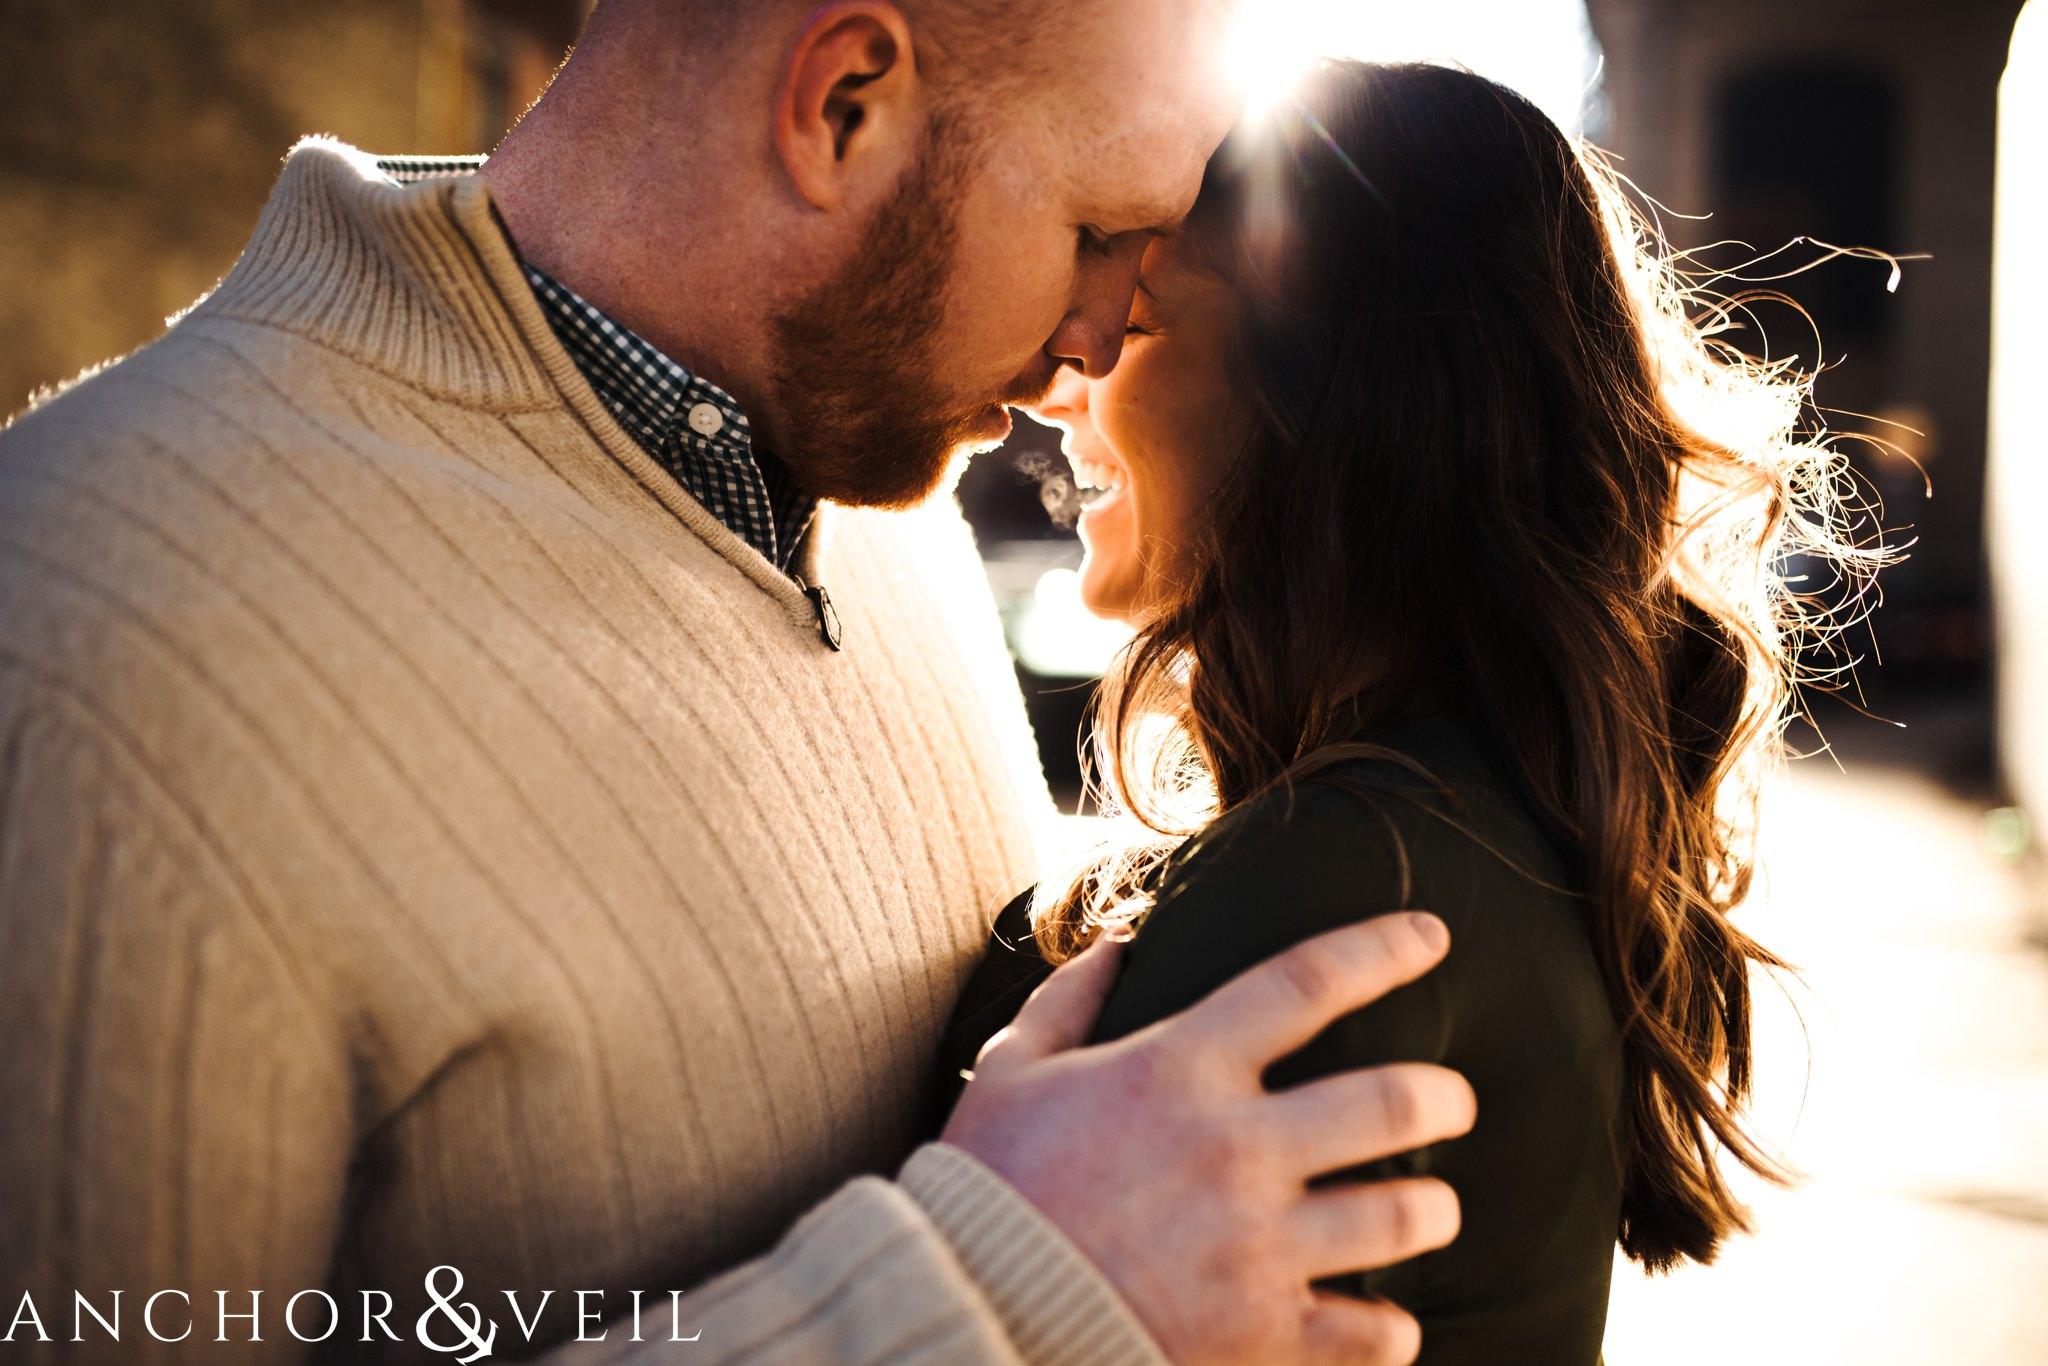 leaning together close in the light During their Dumbo Brooklyn New York engagement session